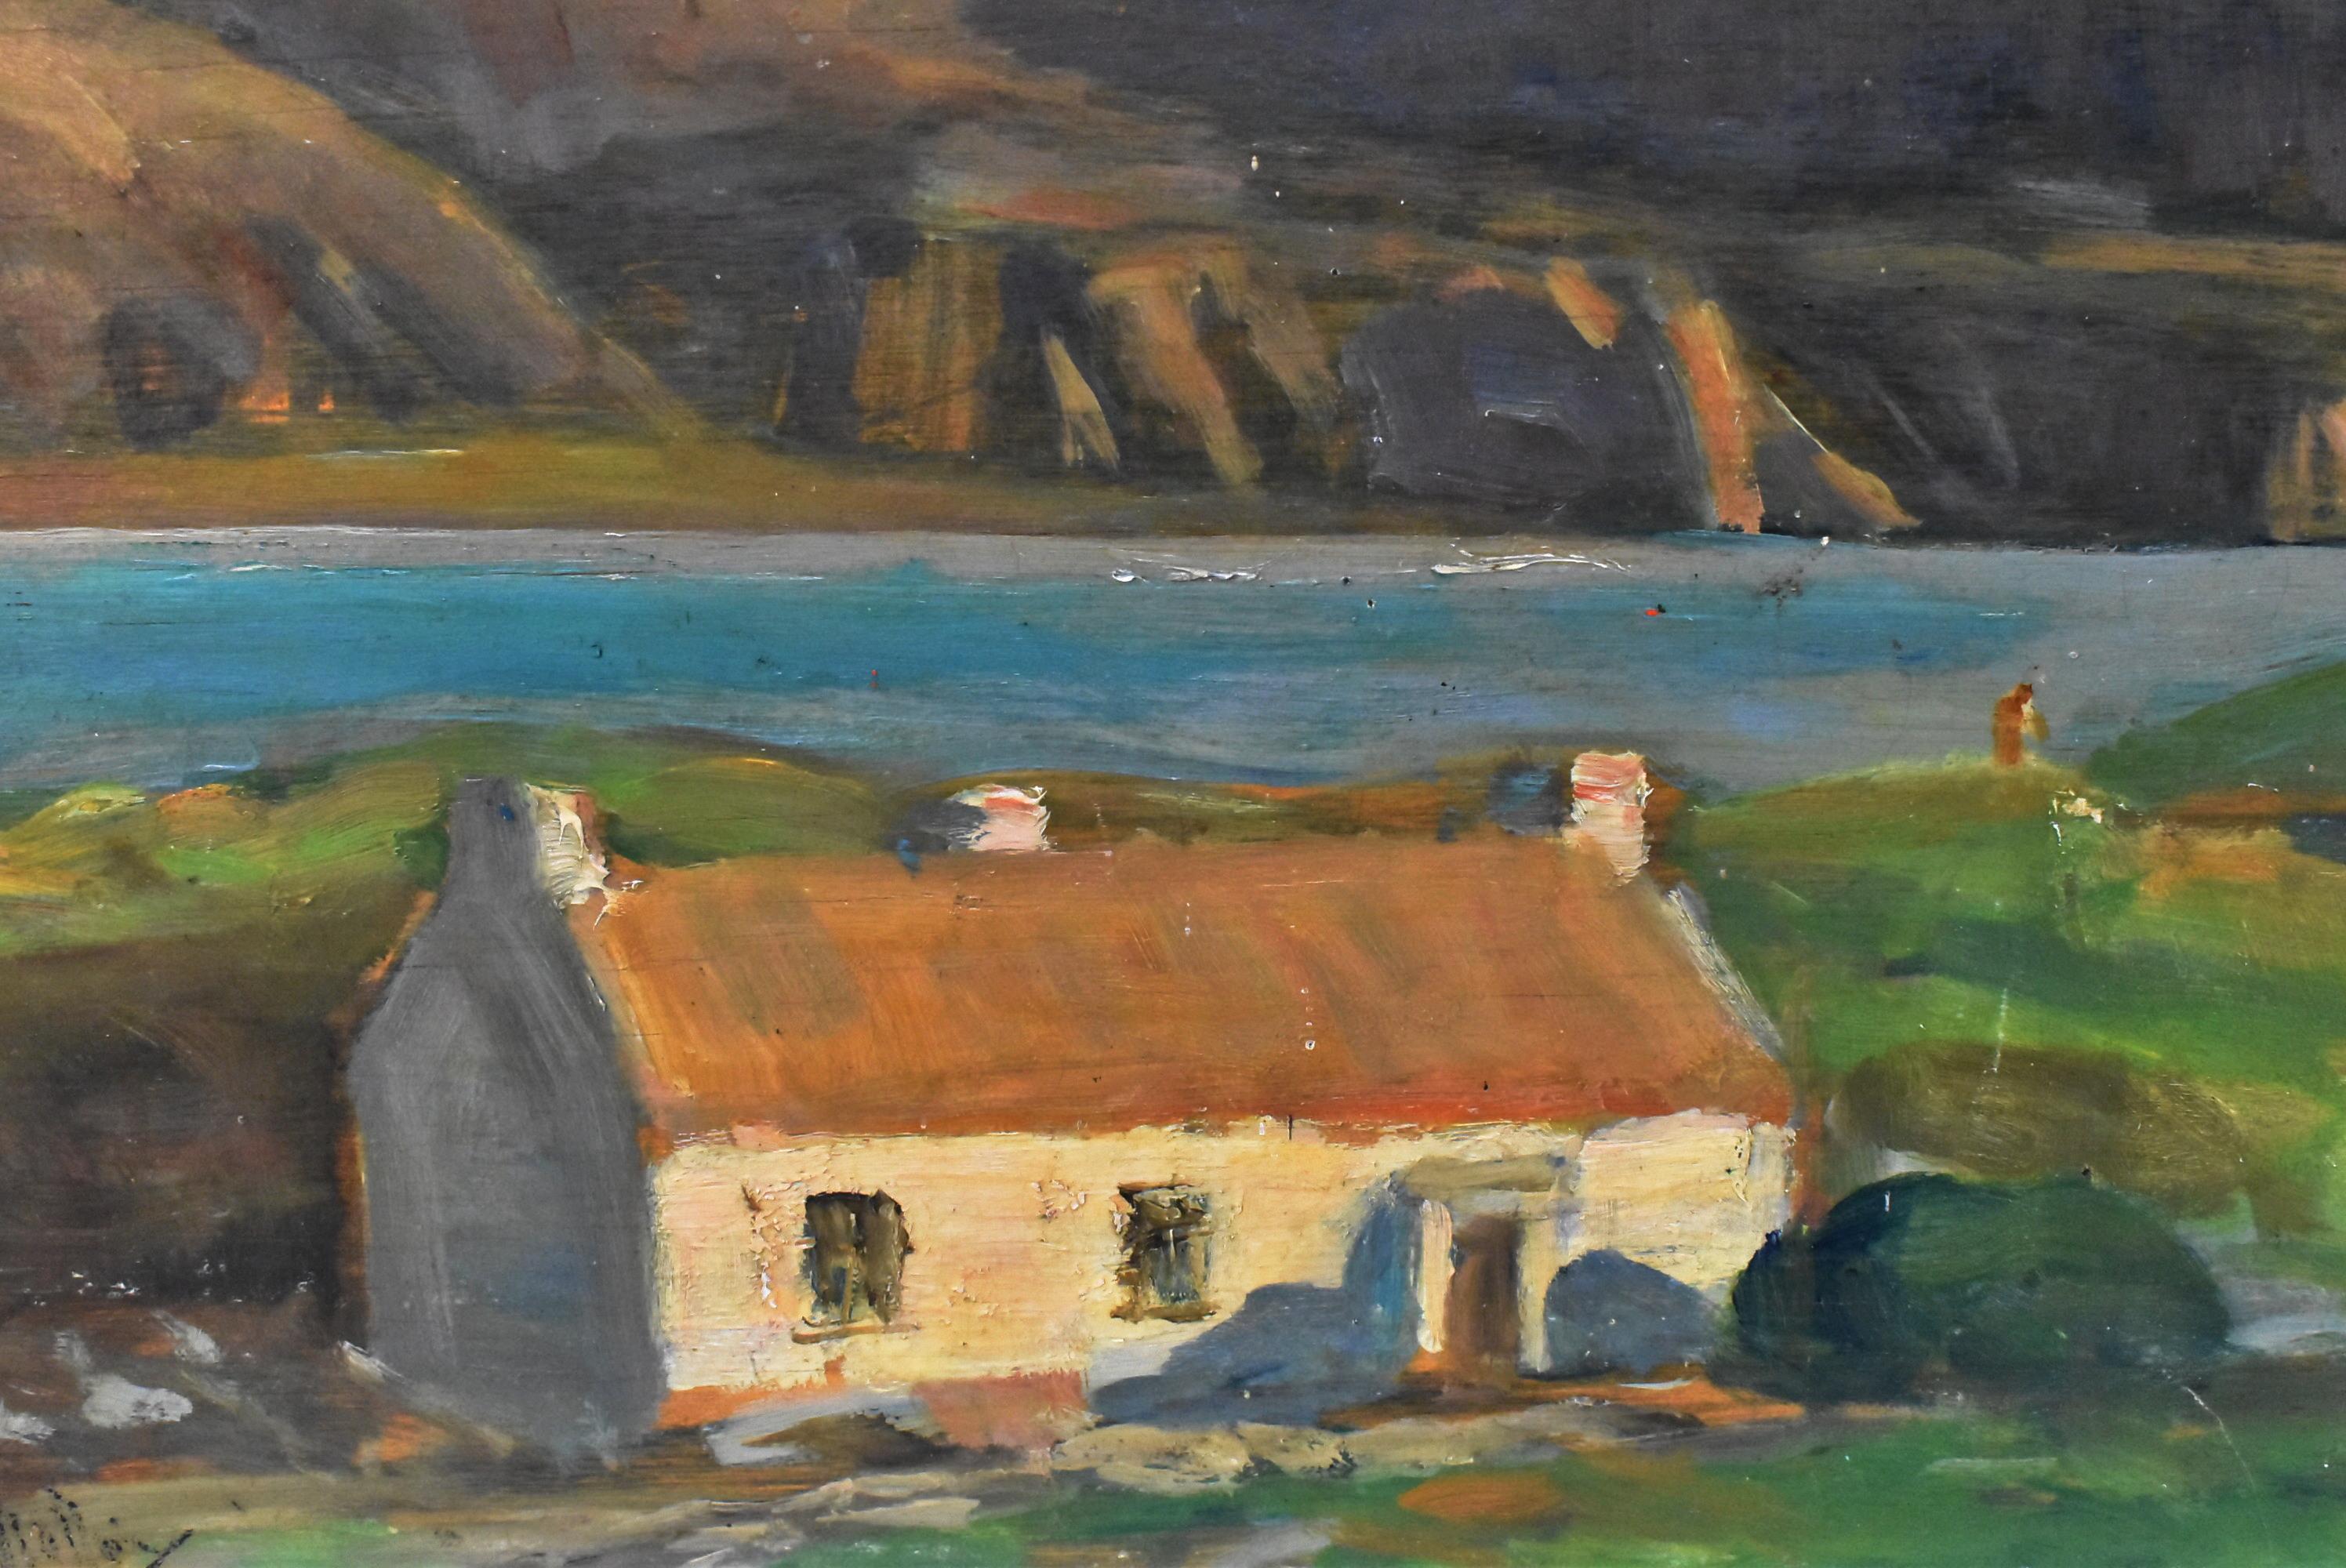 North American Original Oil Painting Landscape Seascape with House by Michael Power O' Malley